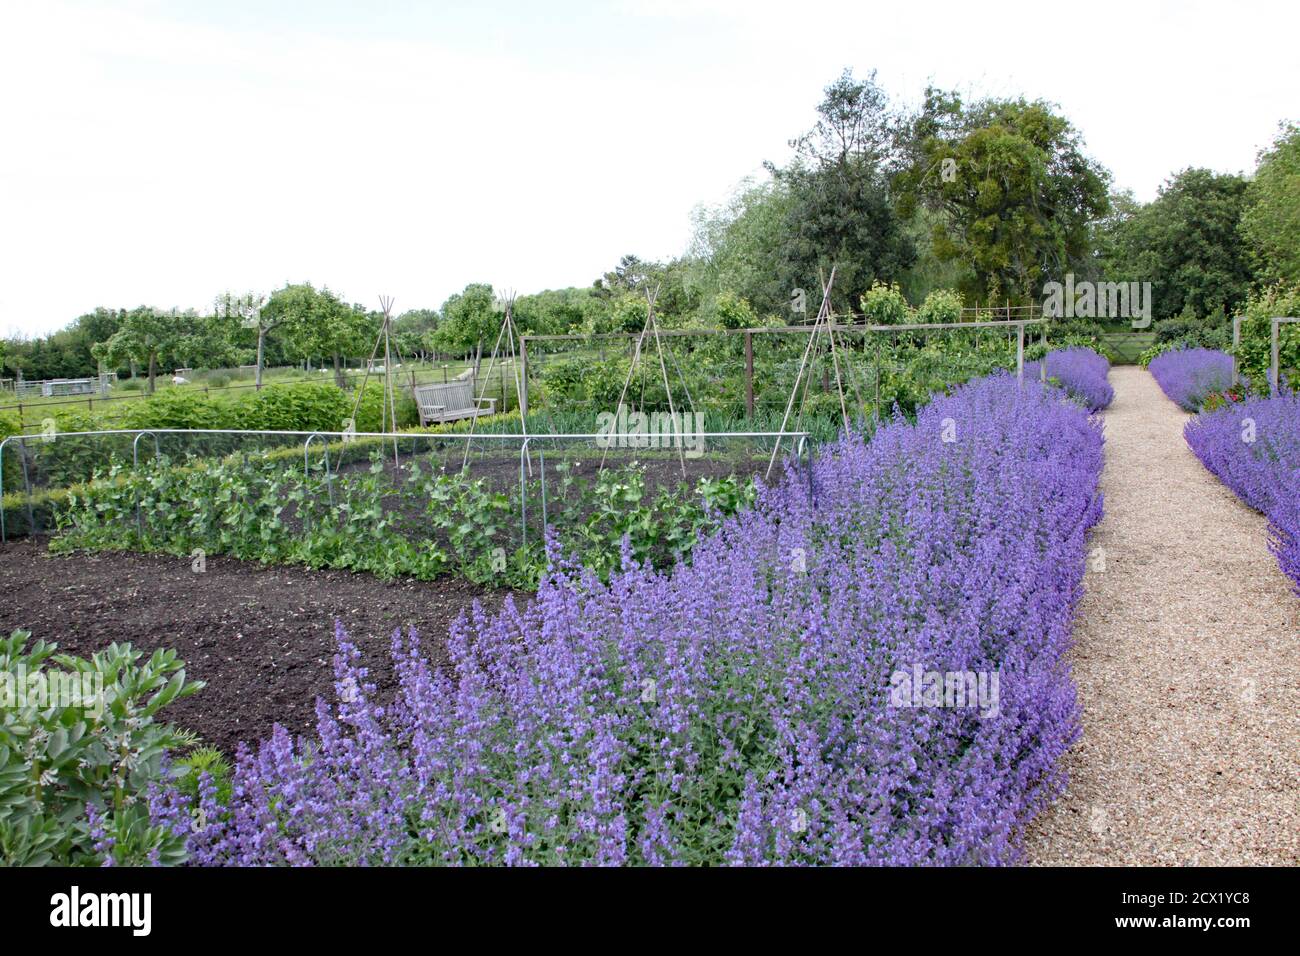 A row of lavender by the side of a gravel pathway forms a border to a kitchen garden. Stock Photo